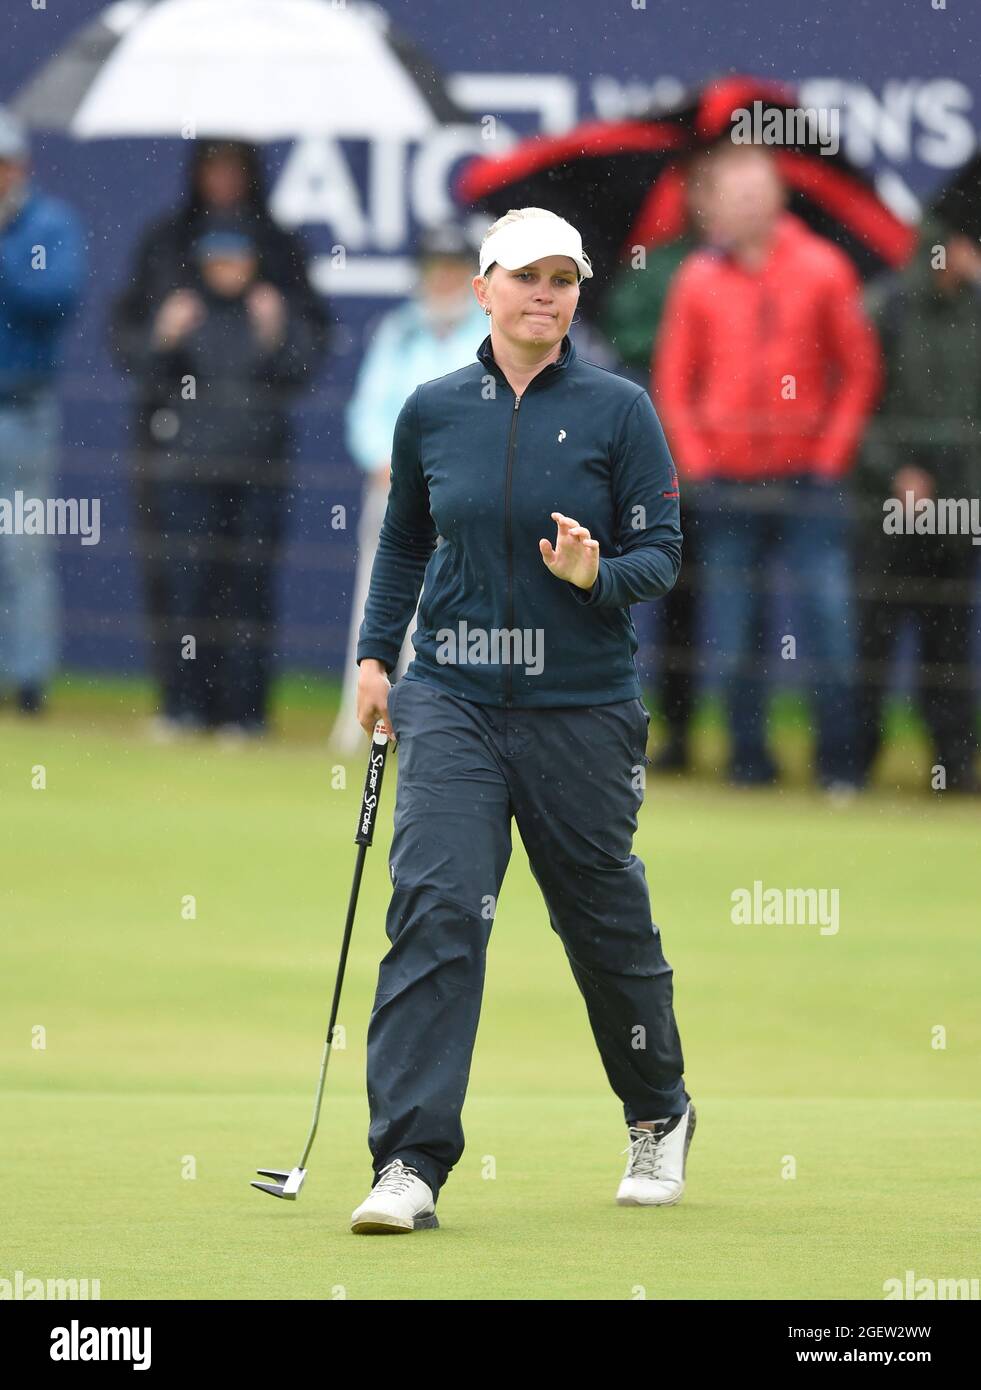 Denmark's Nanna Koerstz Madsen acknowledges the crowd after finishing on the 18th green during day three of the AIG Women's Open at Carnoustie. Picture date: Saturday August 21, 2021. See PA story GOLF Women. Photo credit should read: Ian Rutherford/PA Wire. RESTRICTIONS: Use subject to restrictions. Editorial use only, no commercial use without prior consent from rights holder. Stock Photo